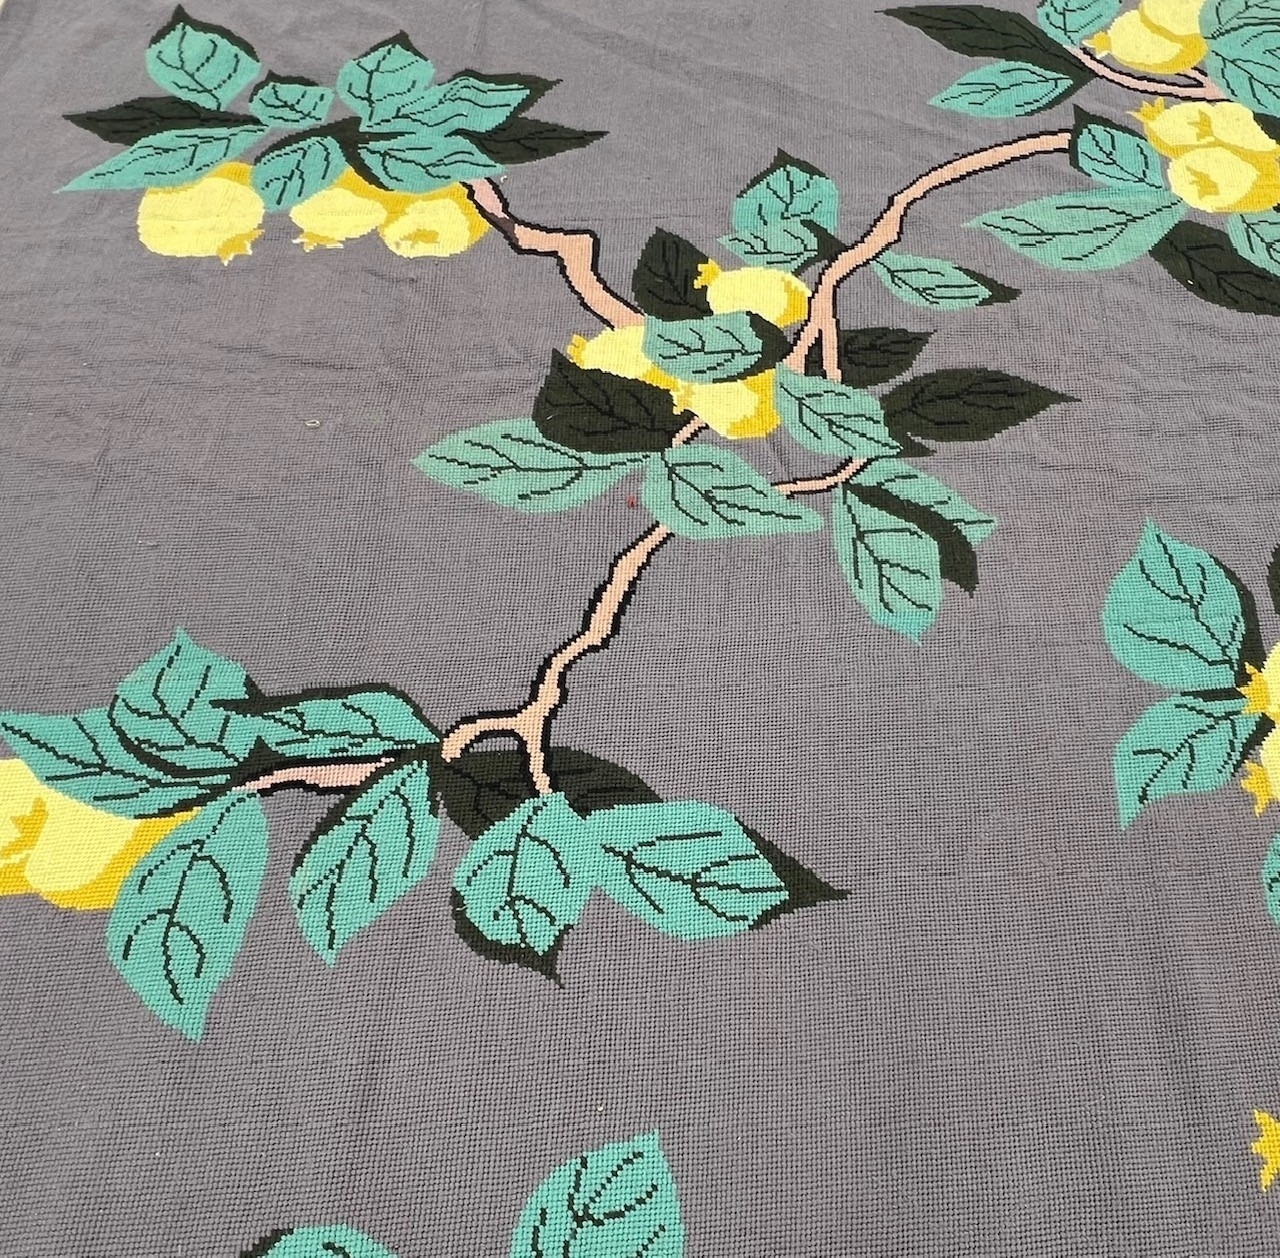 A MASSIVE NEEDLEWORK LEMON TREE (1950-60) ALL WOOL CANVAS CARPET/RUG. (790 x 470cm) Along with - Image 9 of 23